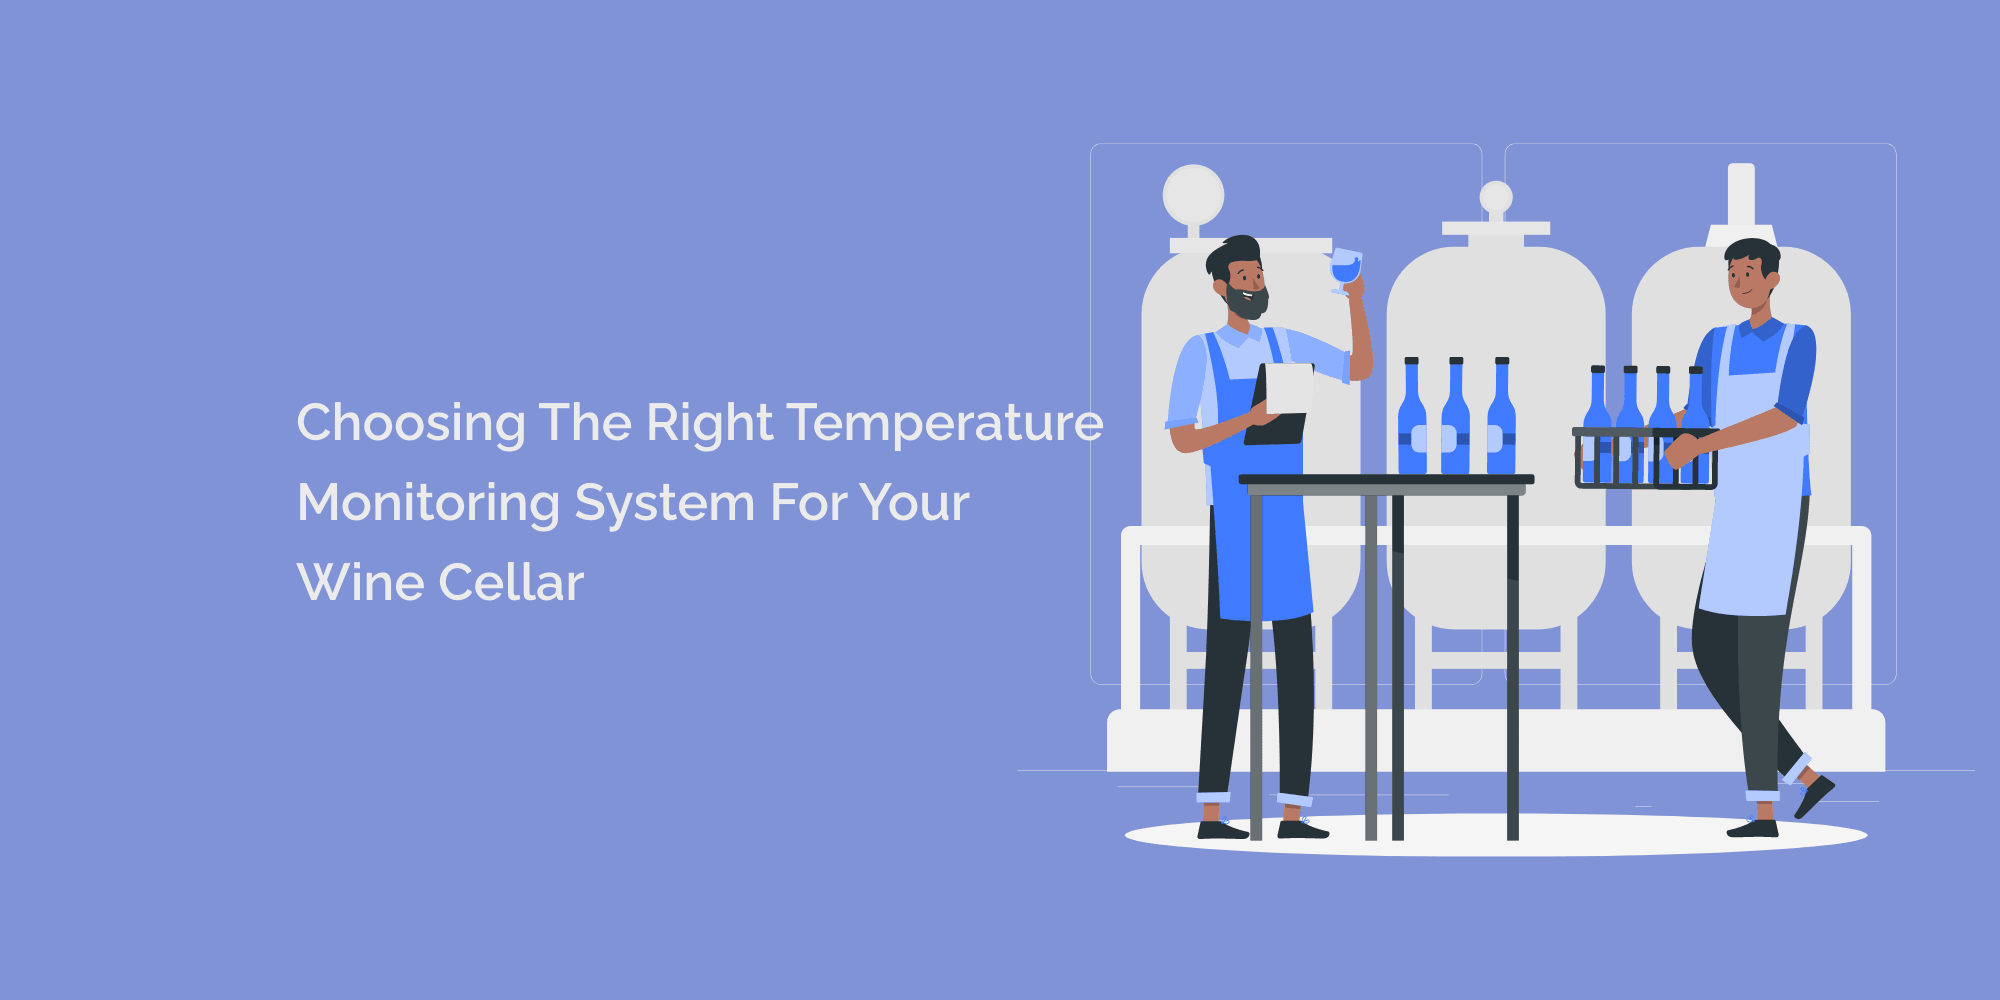 Choosing the Right Temperature Monitoring System for Your Wine Cellar